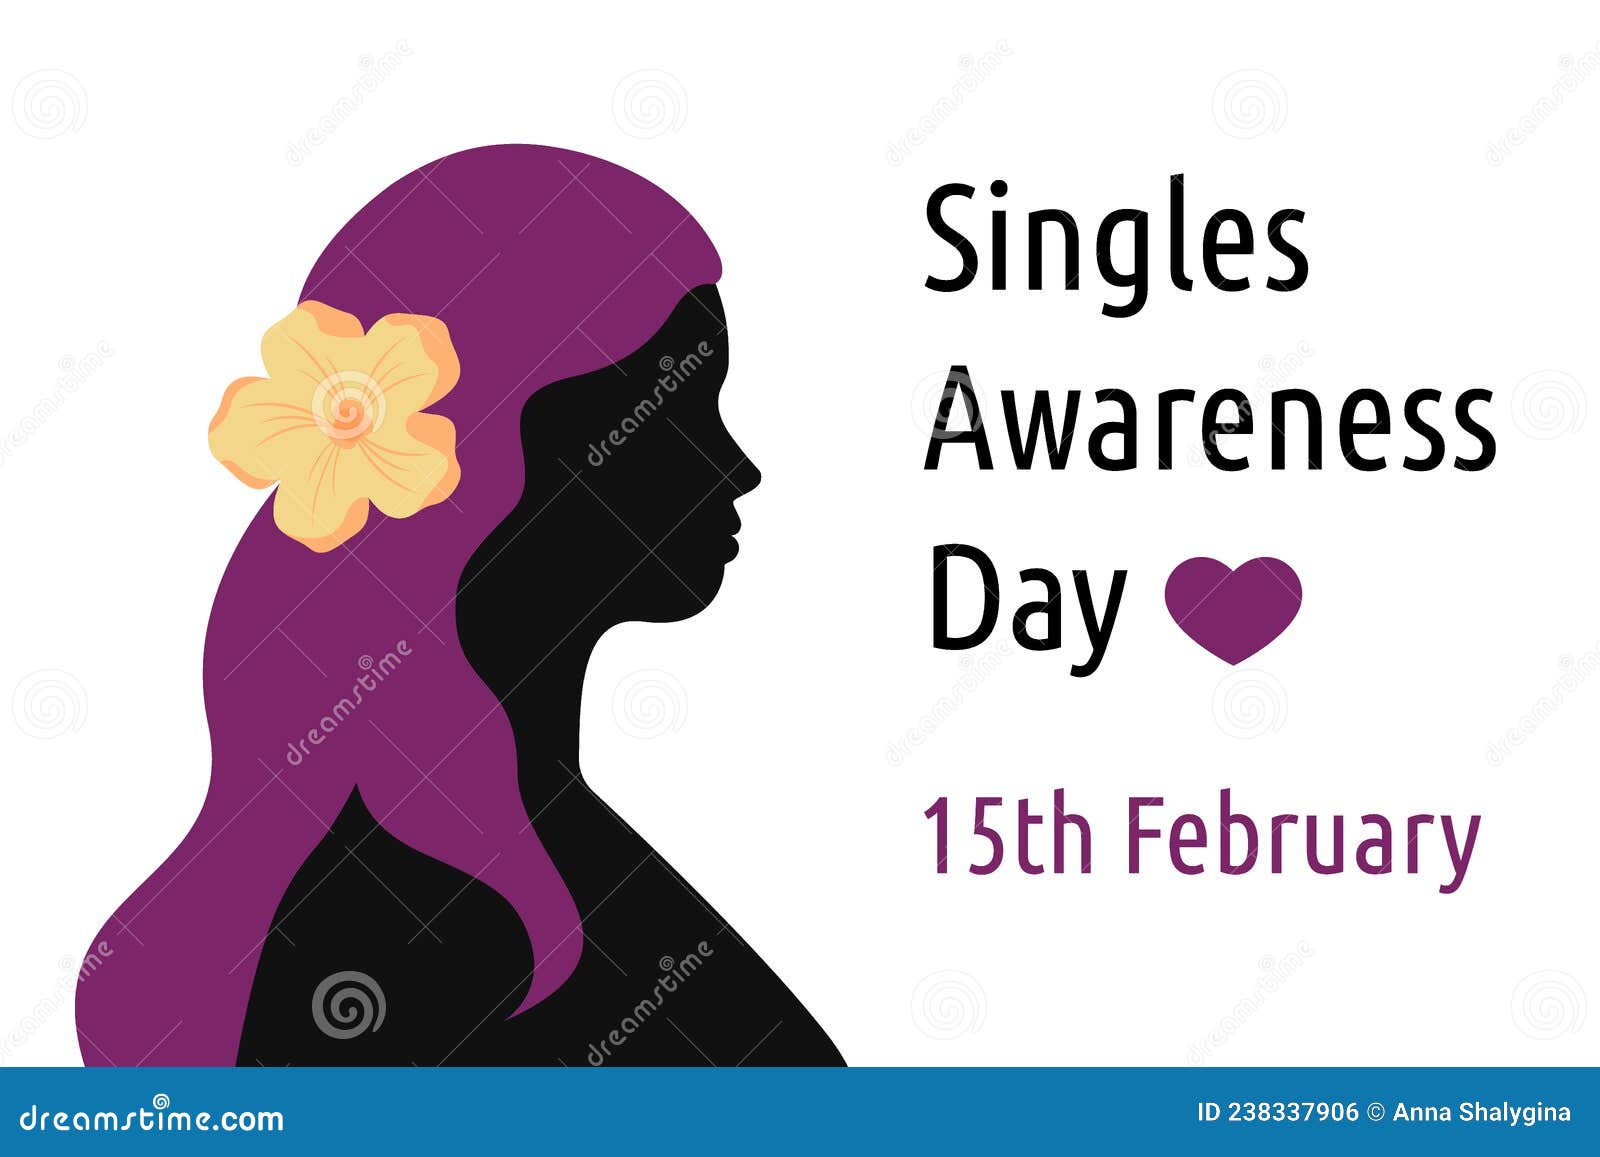 Singles Awareness Day February 15. Vector Poster Illustration. Holiday